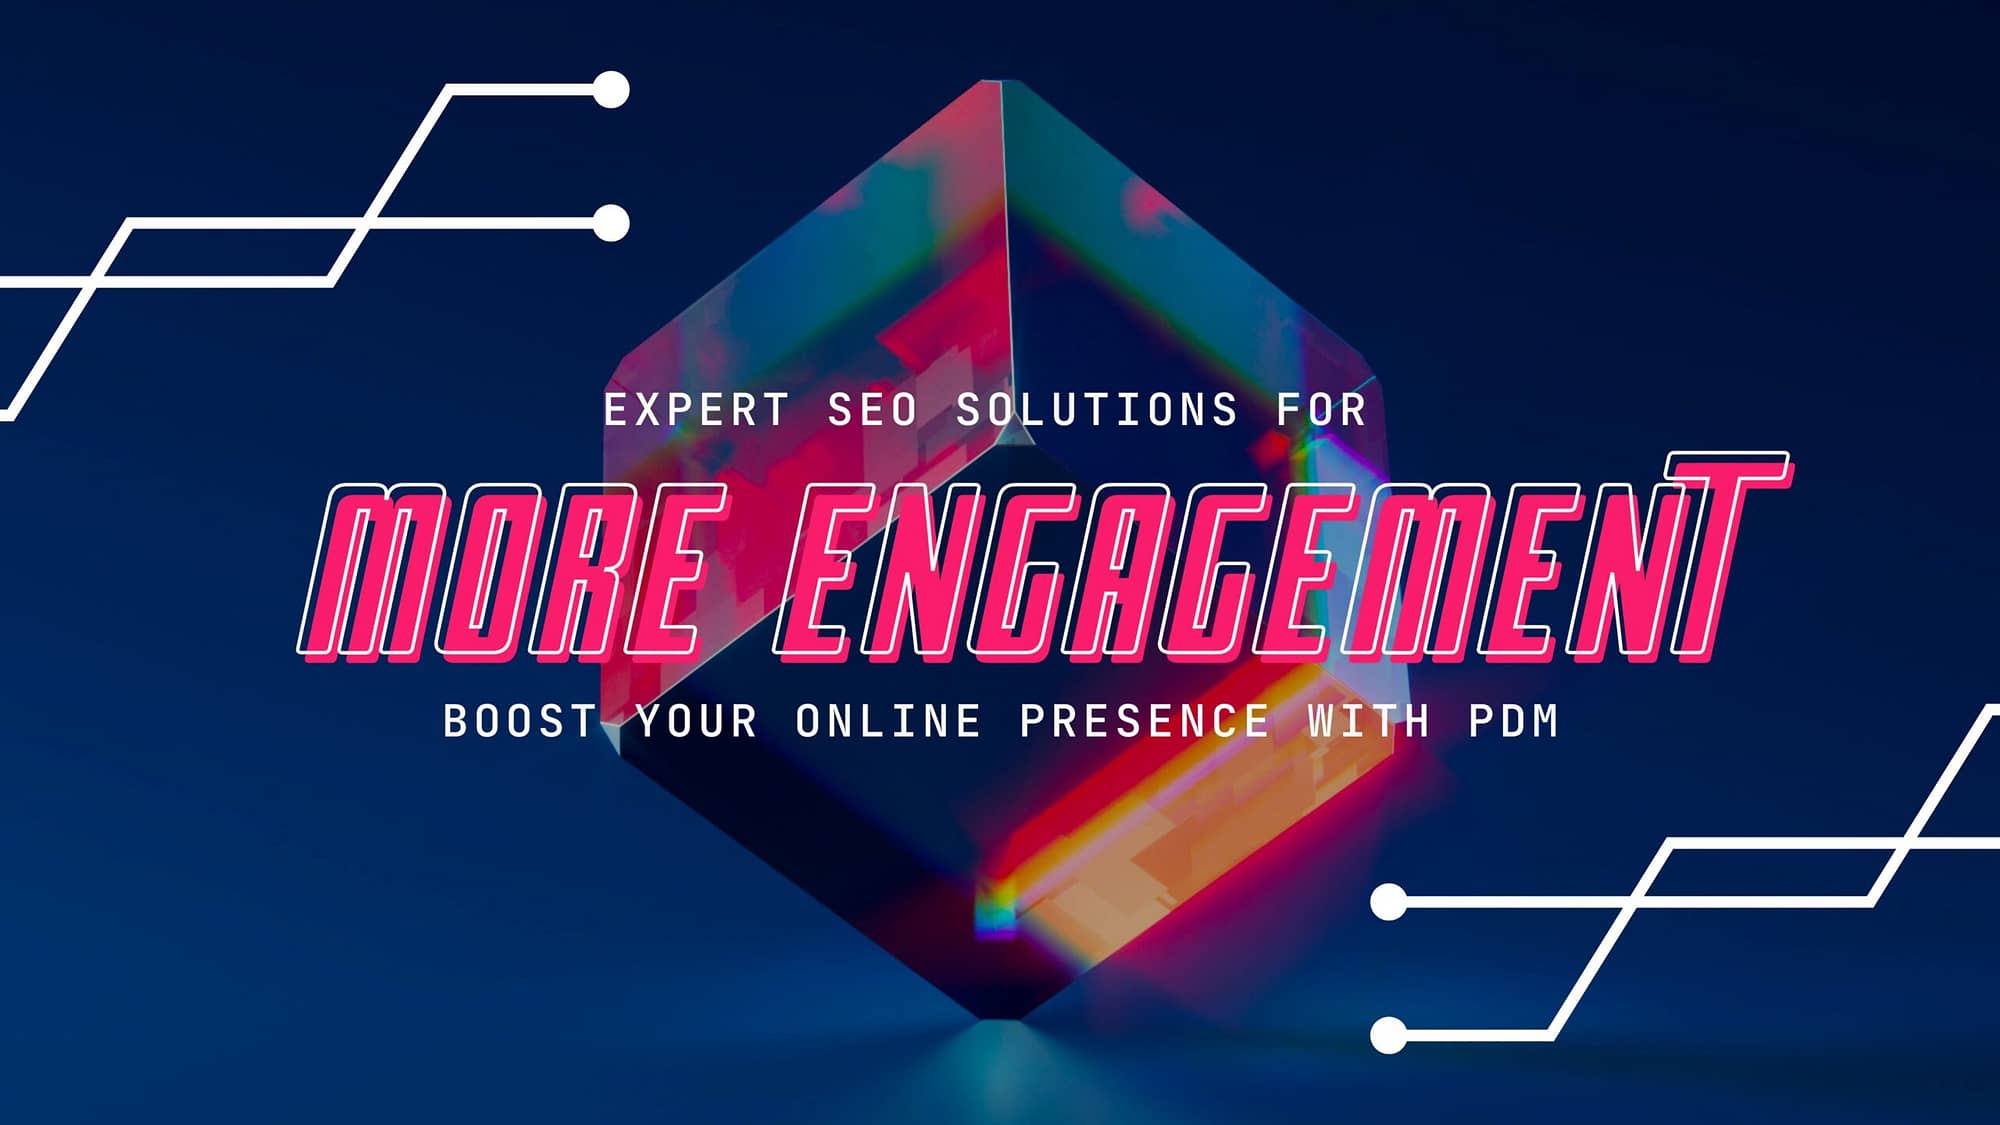 seo in panama for your online presence